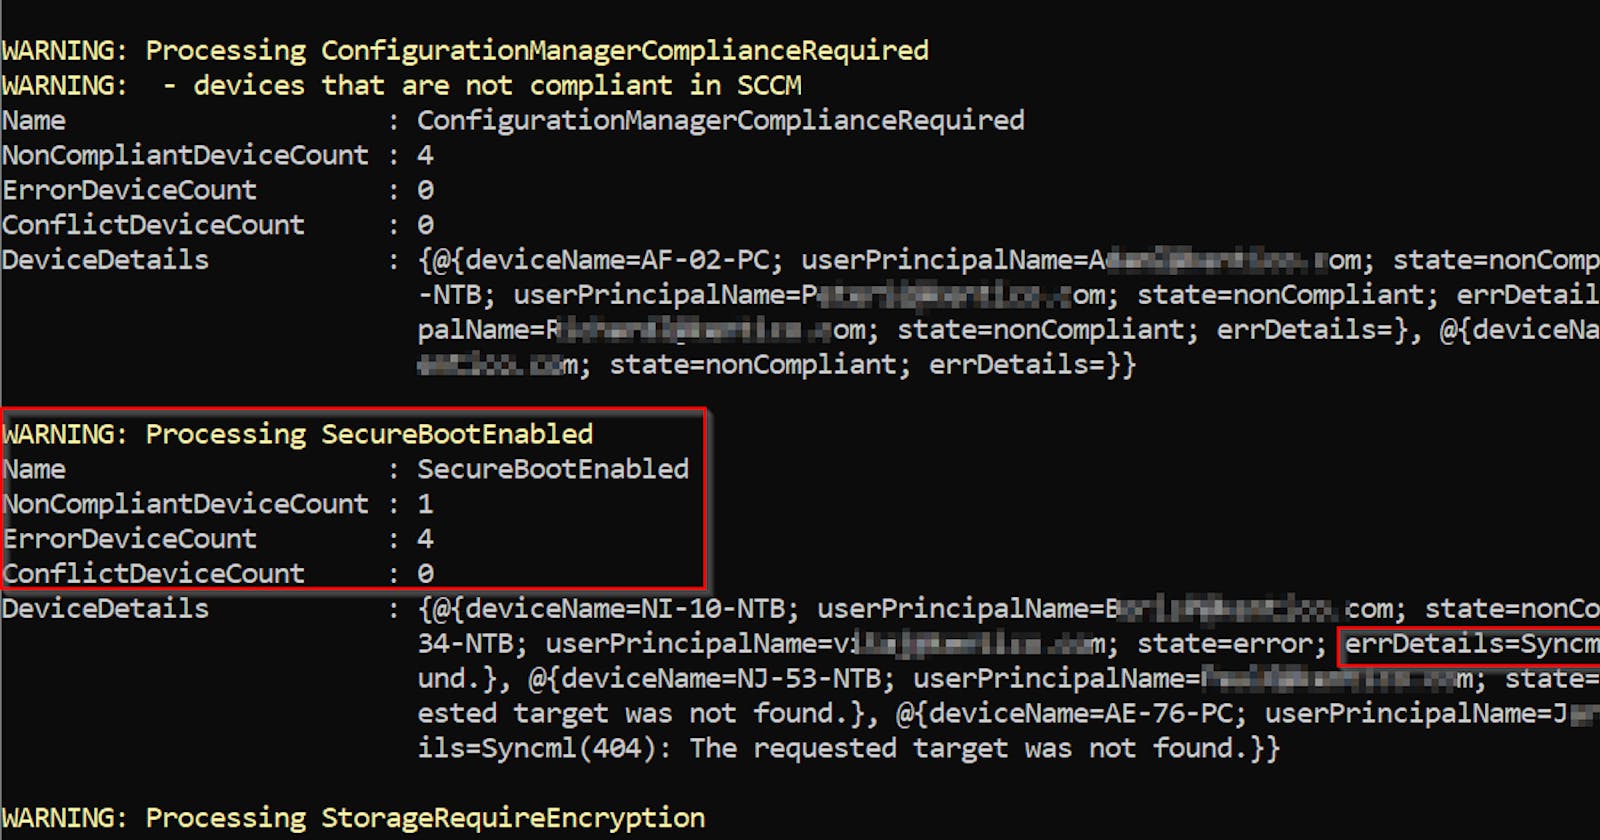 Get Intune Compliance data using PowerShell leveraging Graph API